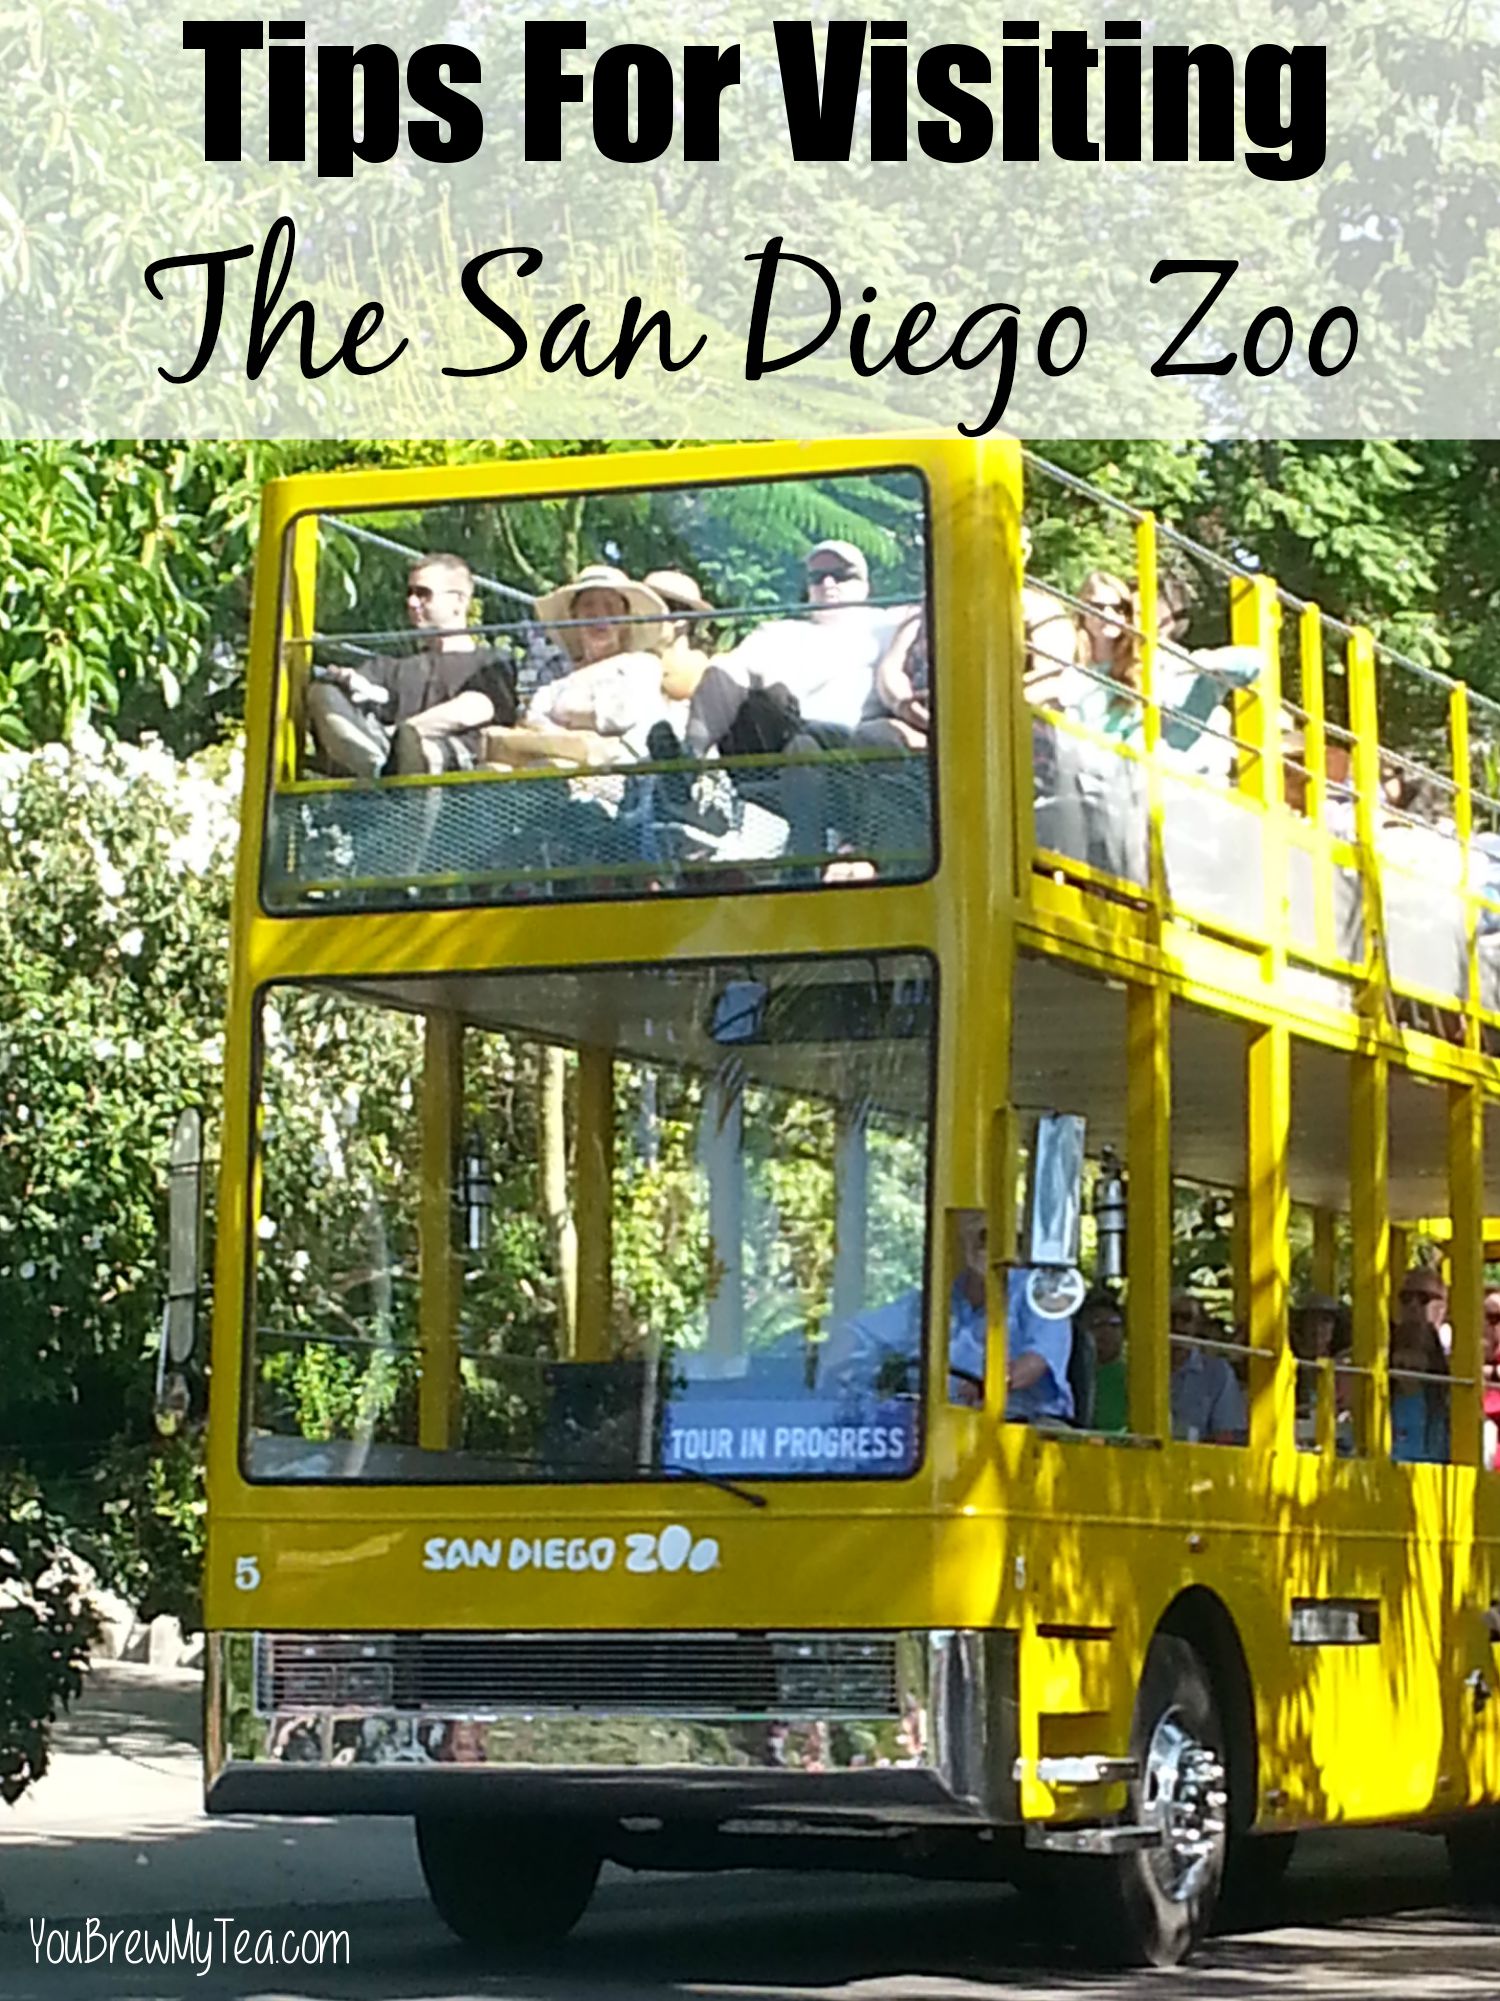 https://www.youbrewmytea.com/wp-content/uploads/2015/07/Tips-For-Visiting-The-San-Diego-Zoo.jpg